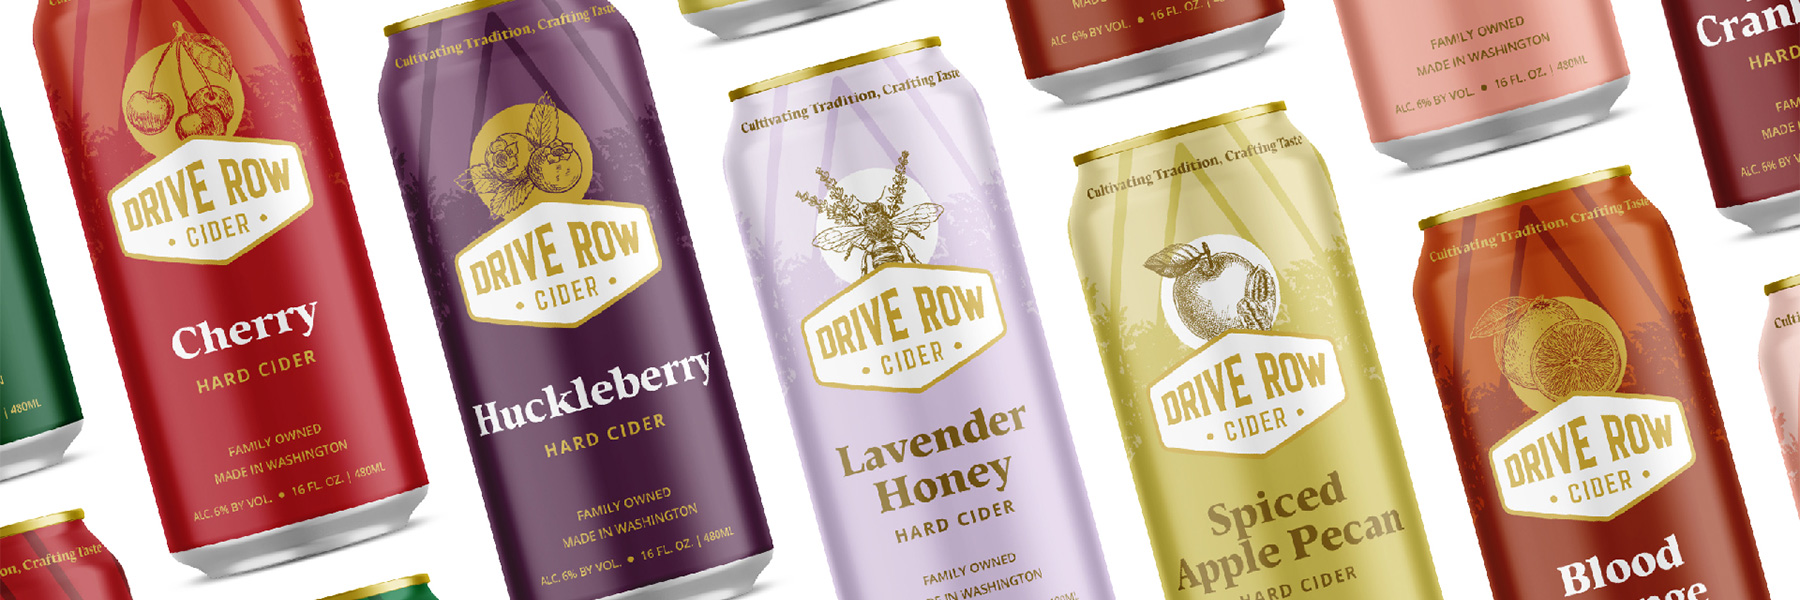 Drive Row Cider Can